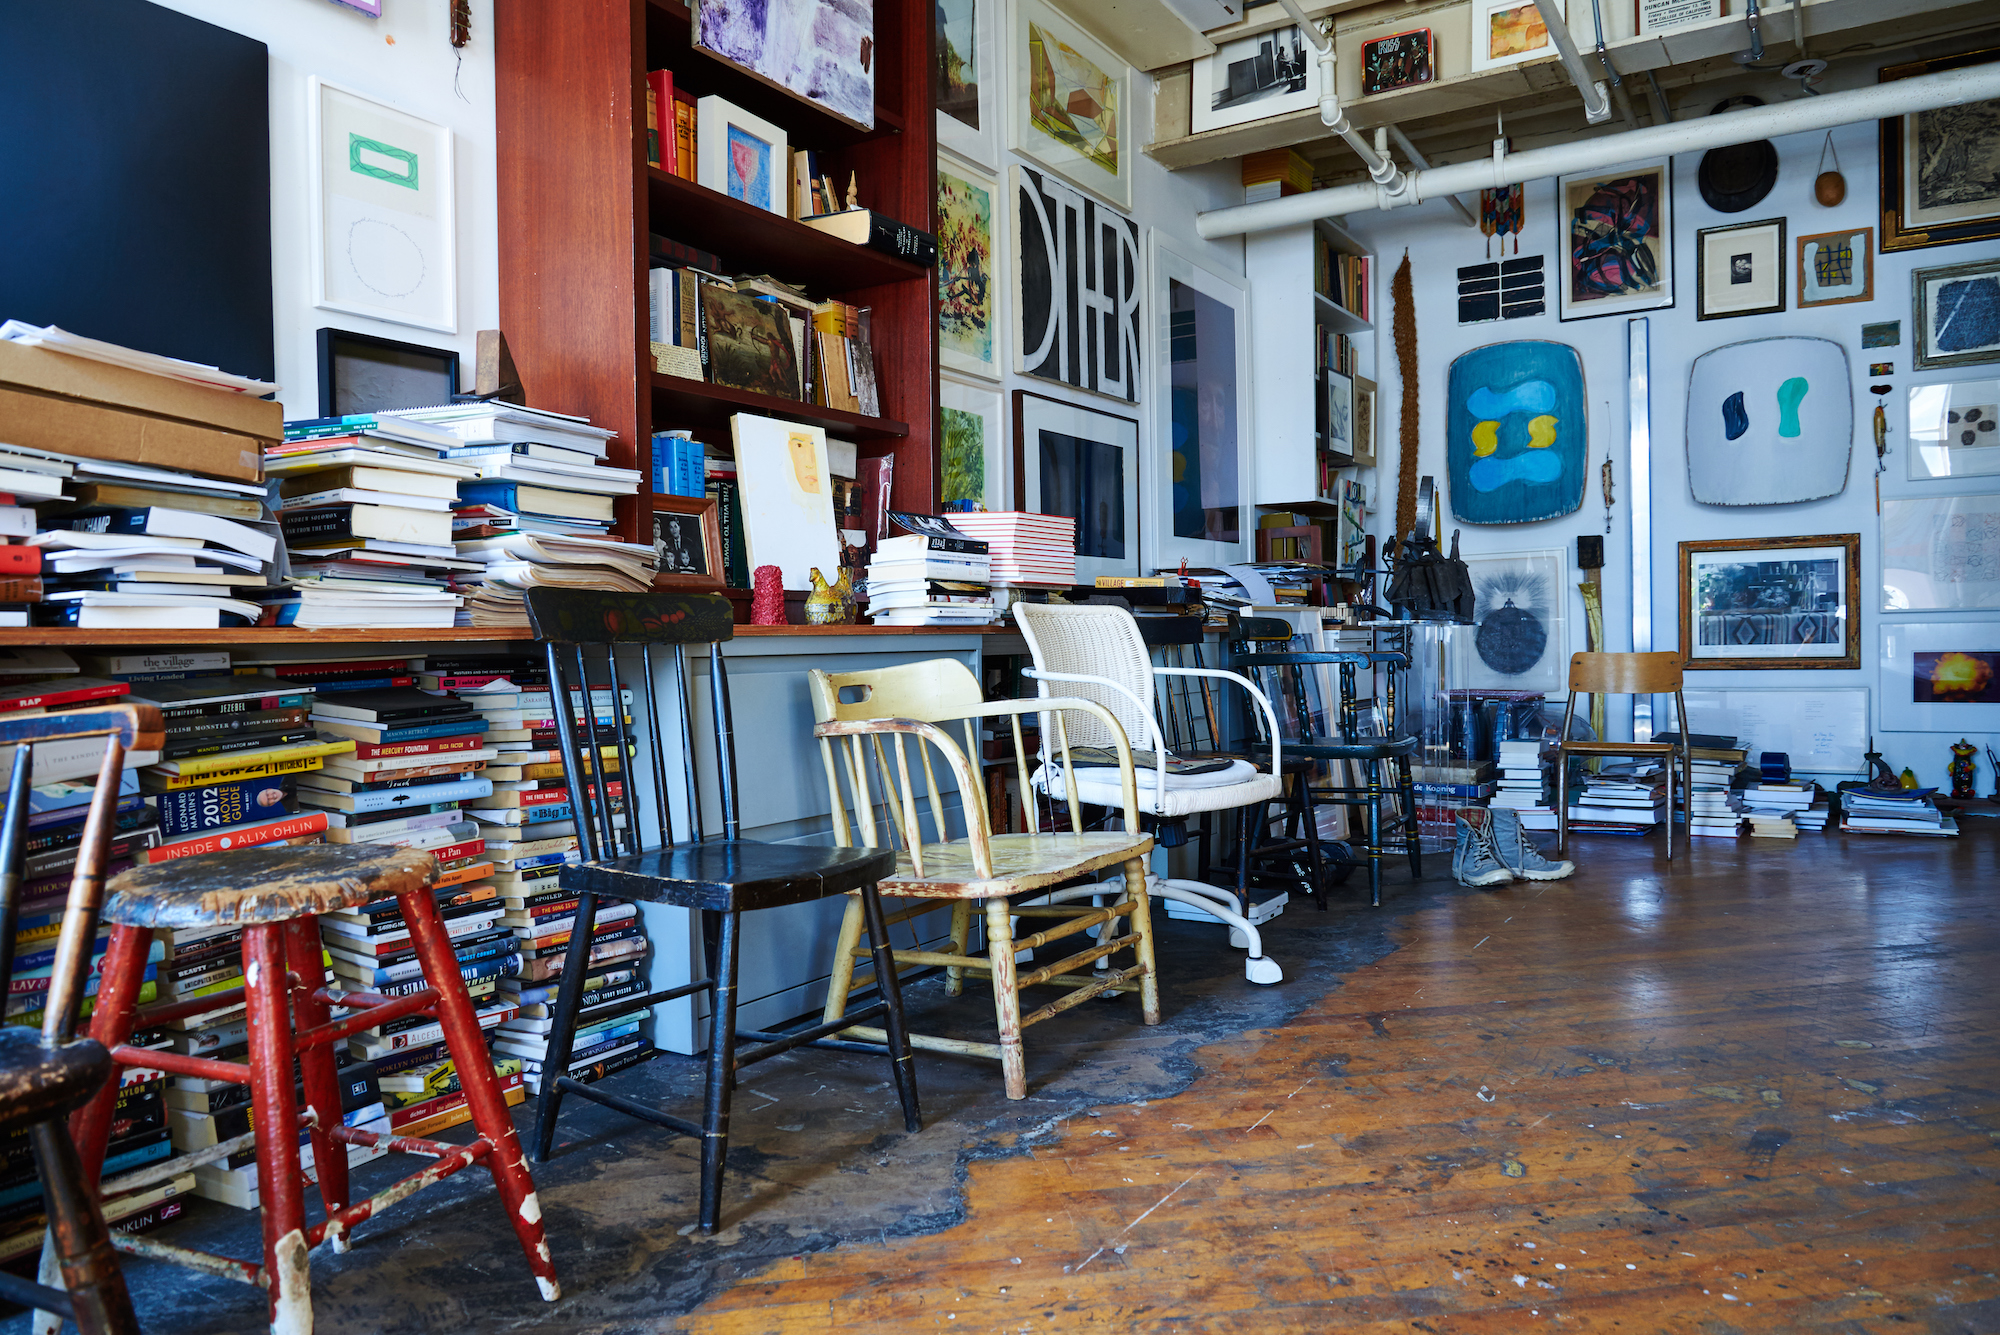 A room with stacks of books, artwork on the walls, and chairs lined up against a wall.